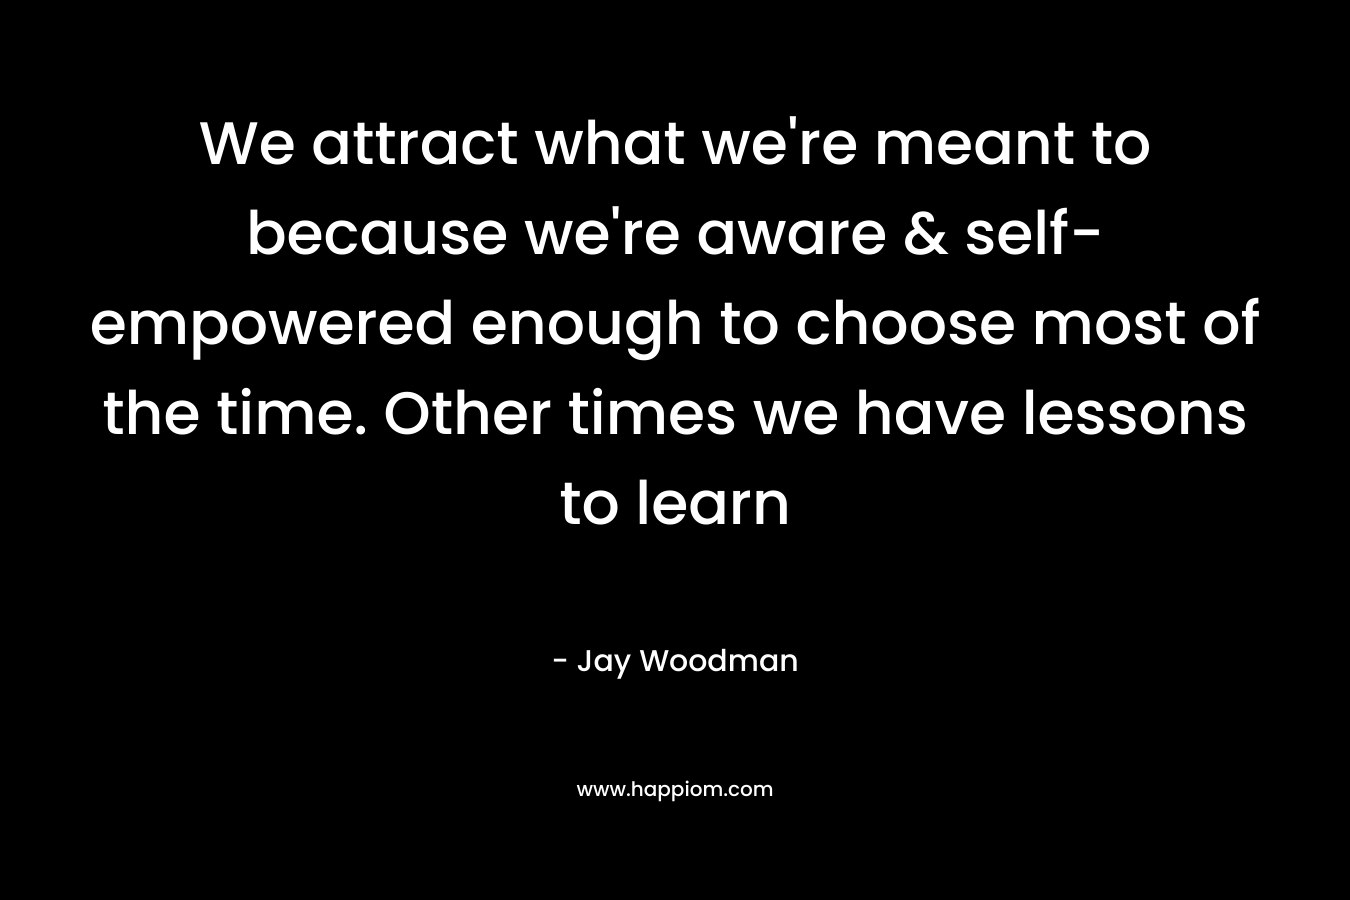 We attract what we’re meant to because we’re aware & self-empowered enough to choose most of the time. Other times we have lessons to learn – Jay Woodman